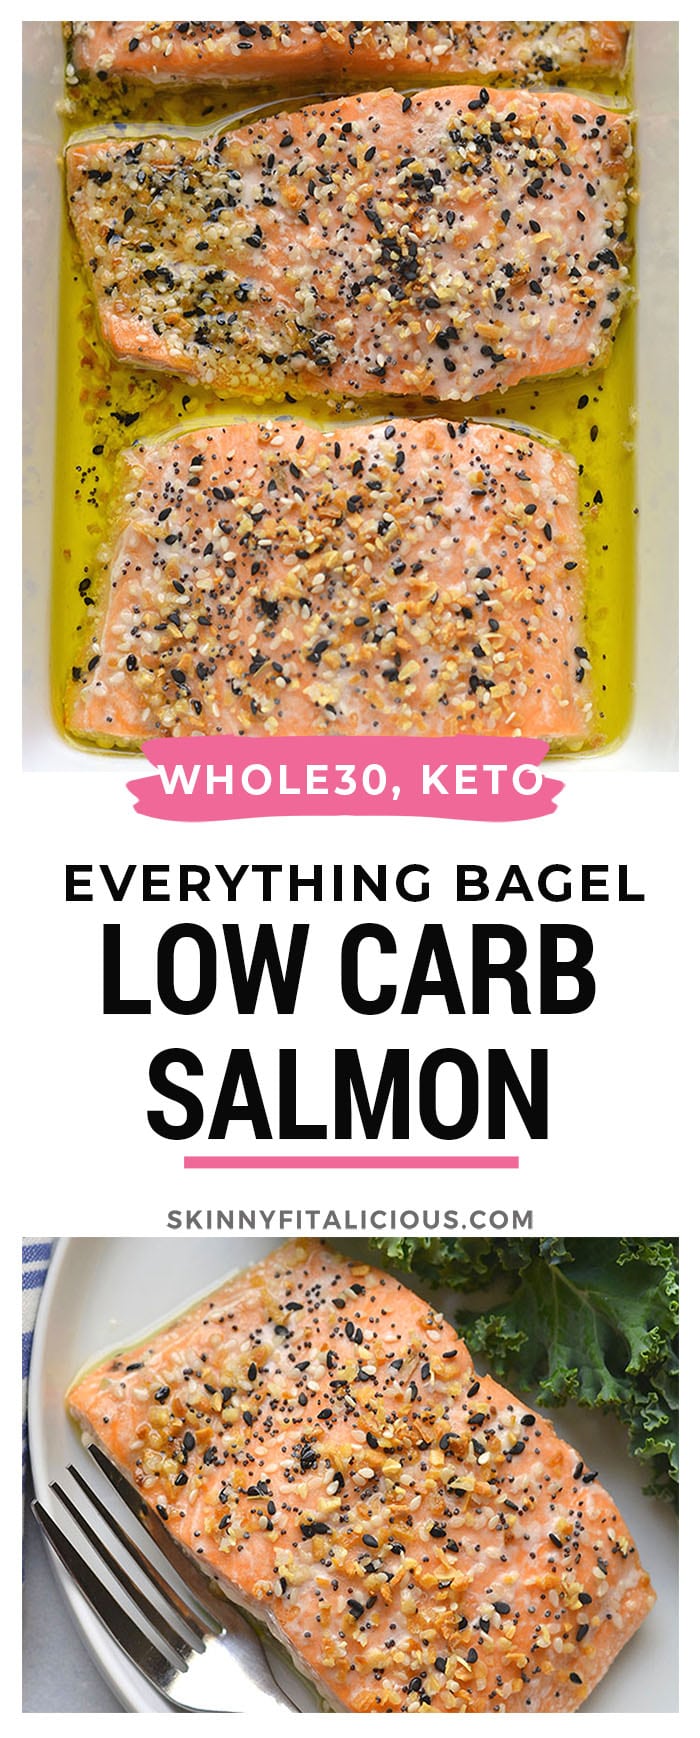 Everything Bagel Salmon! A healthy fish recipe that's Whole30 compliant and baked in 20 minutes. A quick and easy meal that is easy and delicious. Low Carb + Paleo + Whole30 + Keto + Gluten Free + Low Calorie